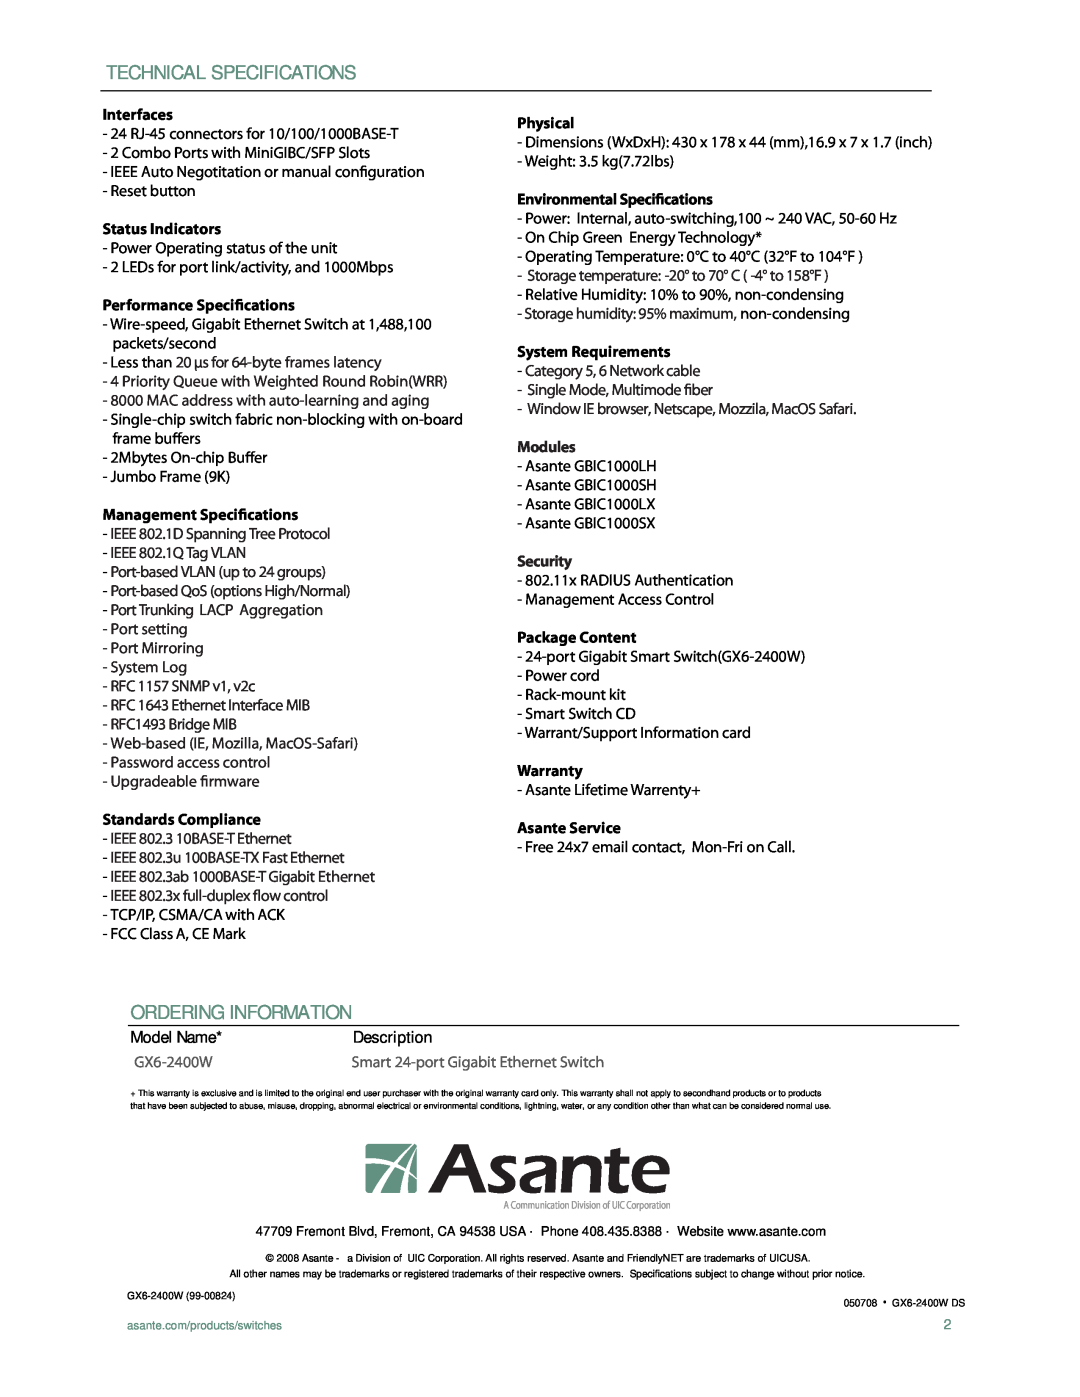 Asante Technologies GX6-2400W Technical Specifications, Ordering Information, Model Name, Description, Modules, Security 